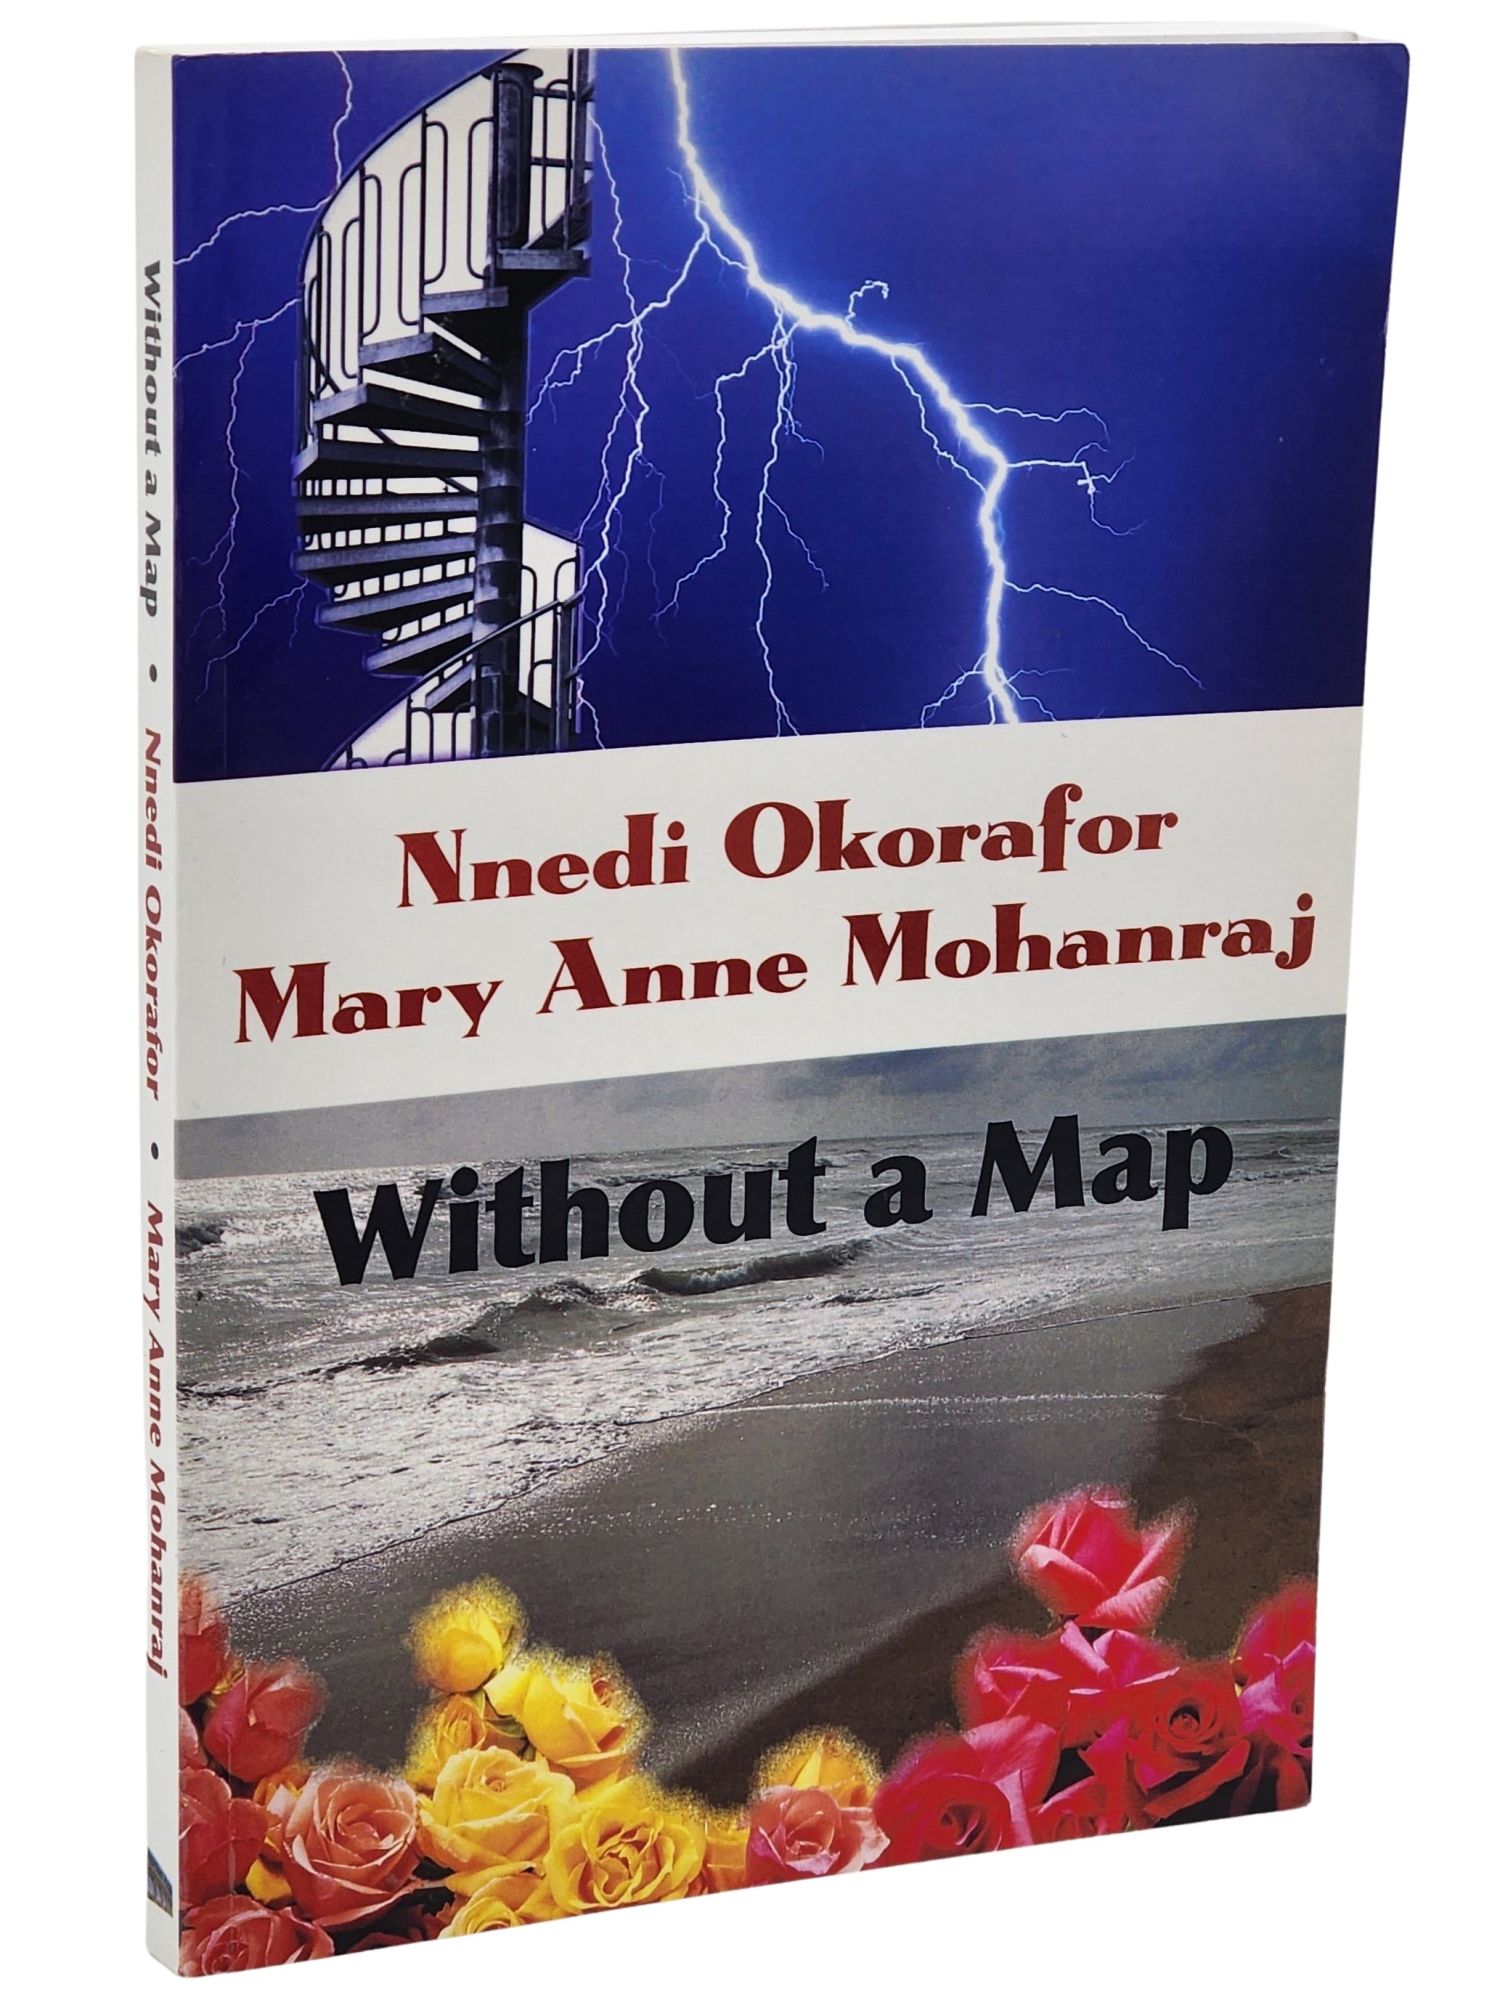 [Book #51062] WITHOUT A MAP. Nnedi Okorafor, Mary Anne Mohanraj.